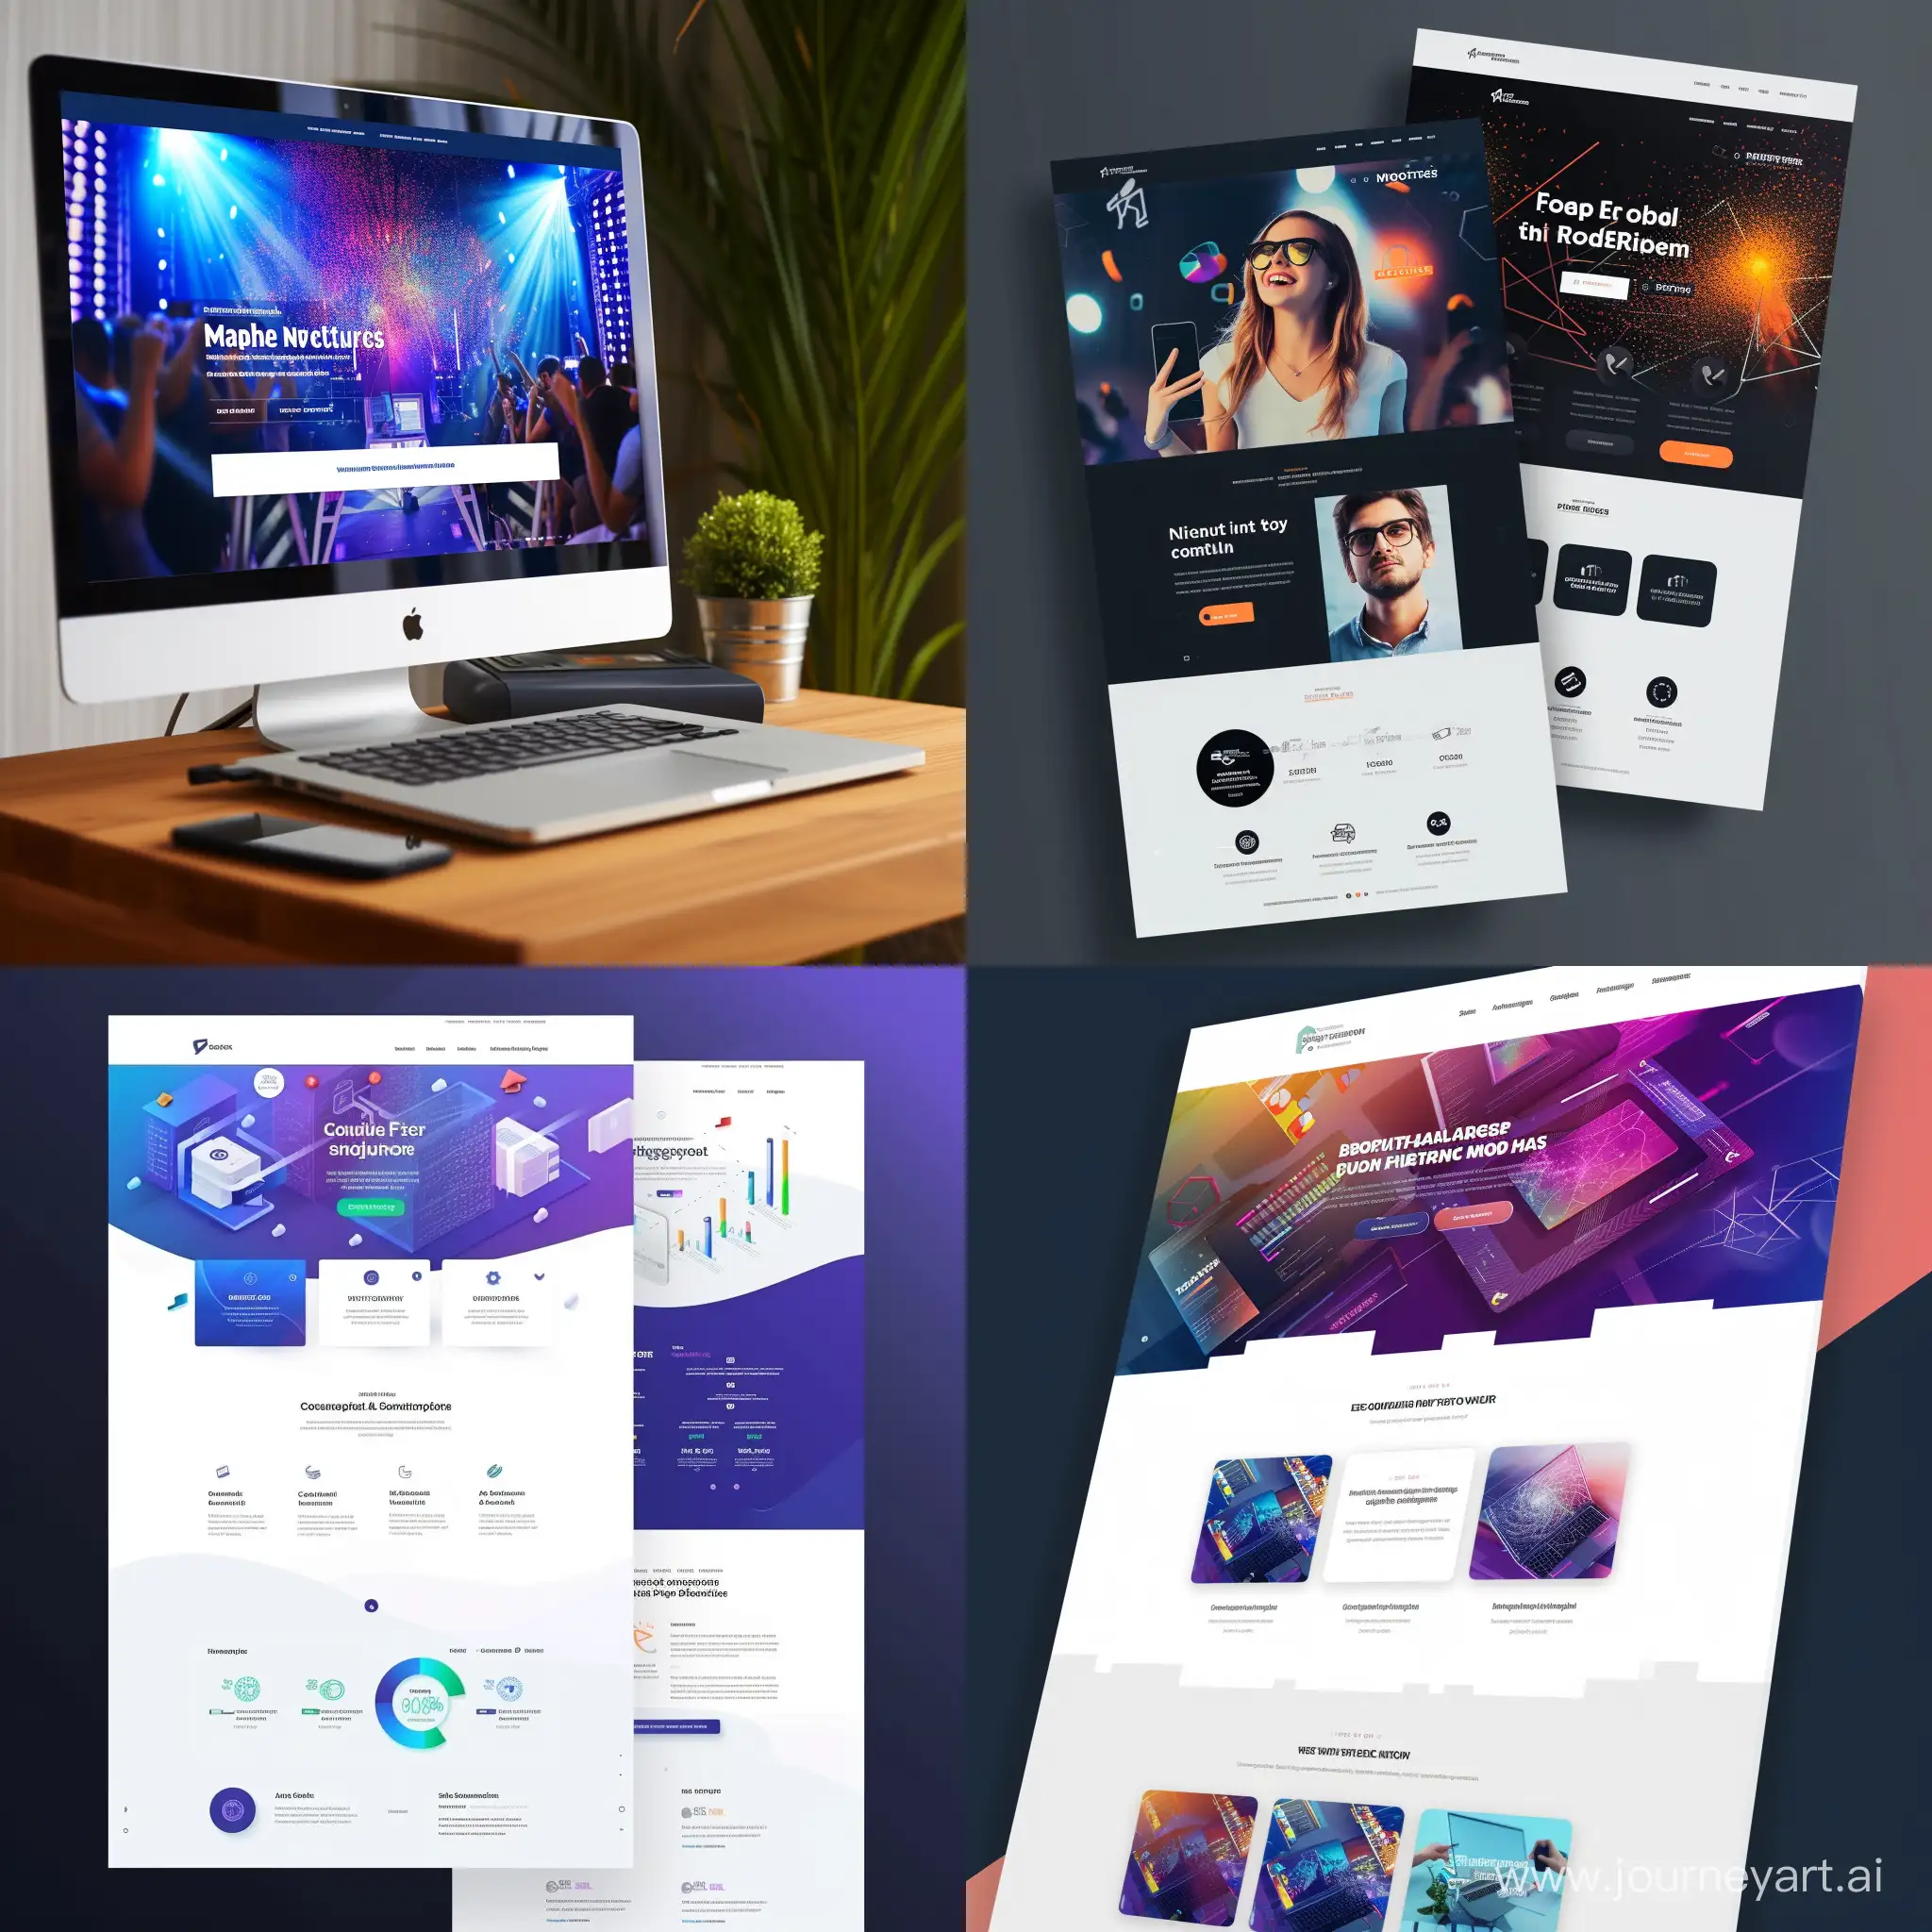 Dynamic-IT-Event-Website-Design-with-Versatility-Version-6-Aspect-Ratio-11-Image-Number-71311